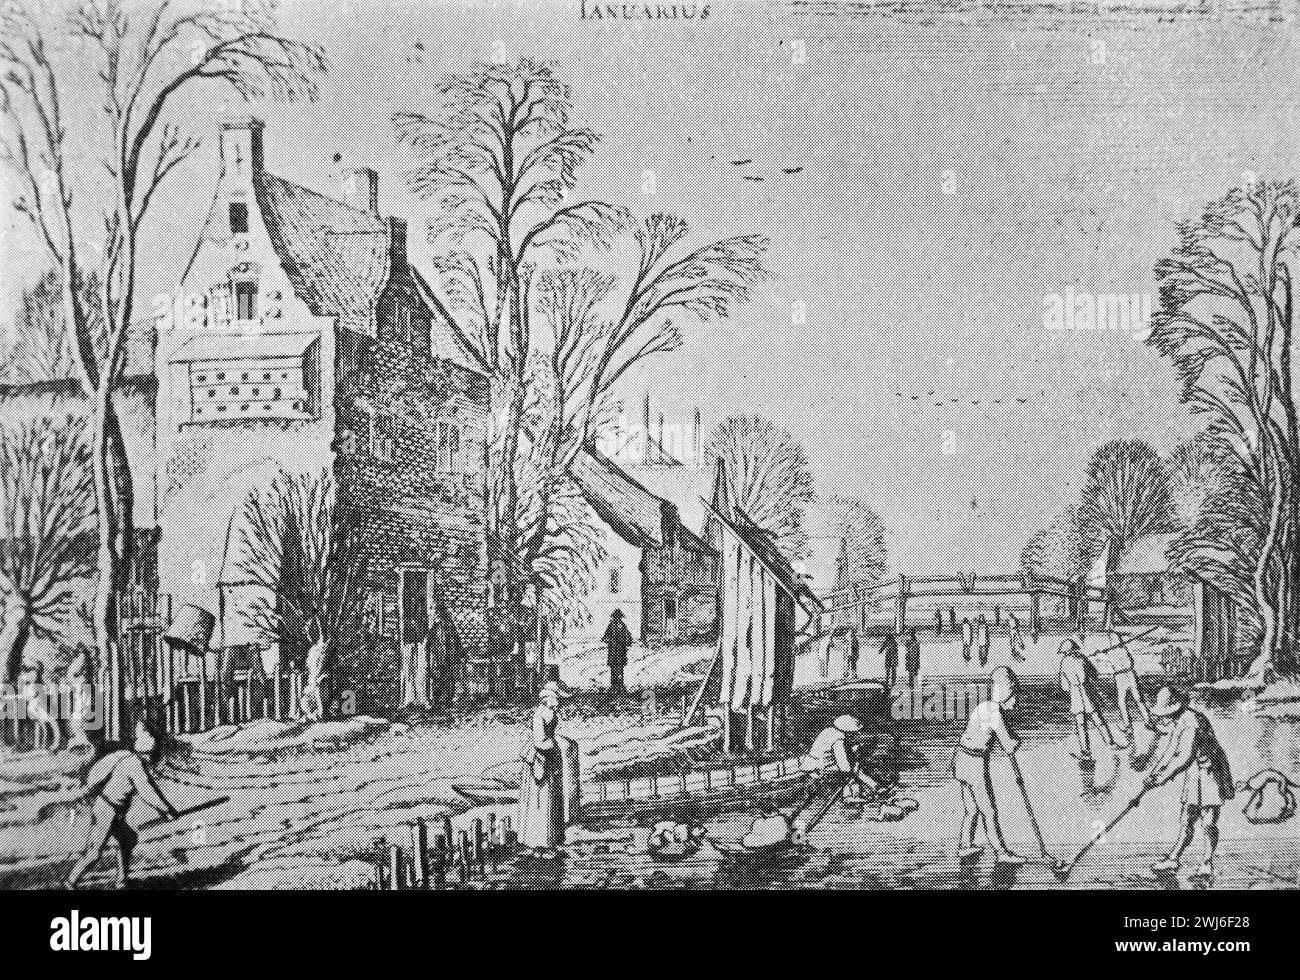 Engraving after Jan van de Velde. Golfing on a frozen canal in Holland. Black and White Illustration from the Connoisseur, an Illustrated Magazine for Collectors Voll 3 (May-Aug 1902) published in London. Stock Photo